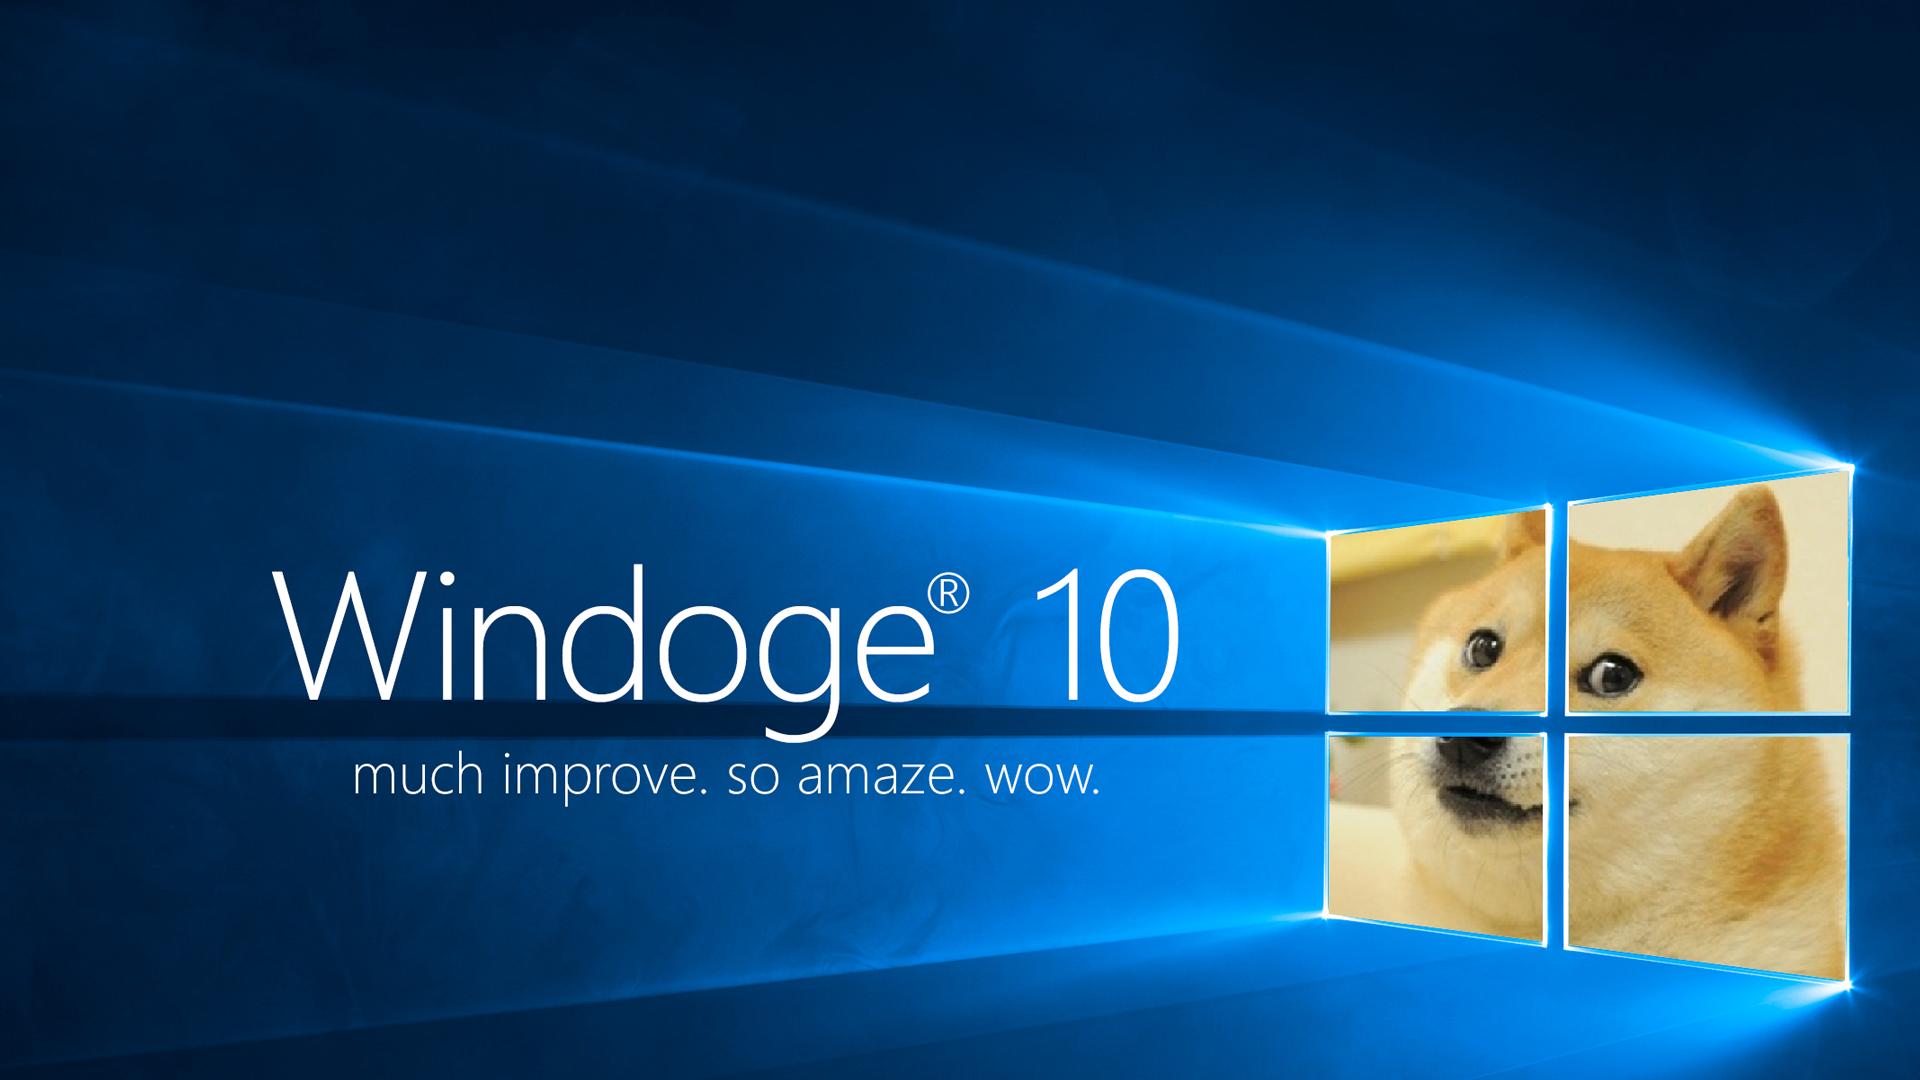 Windoge 10: much improve. so amaze. wow. 2560x1600 (other resolutions in reply)